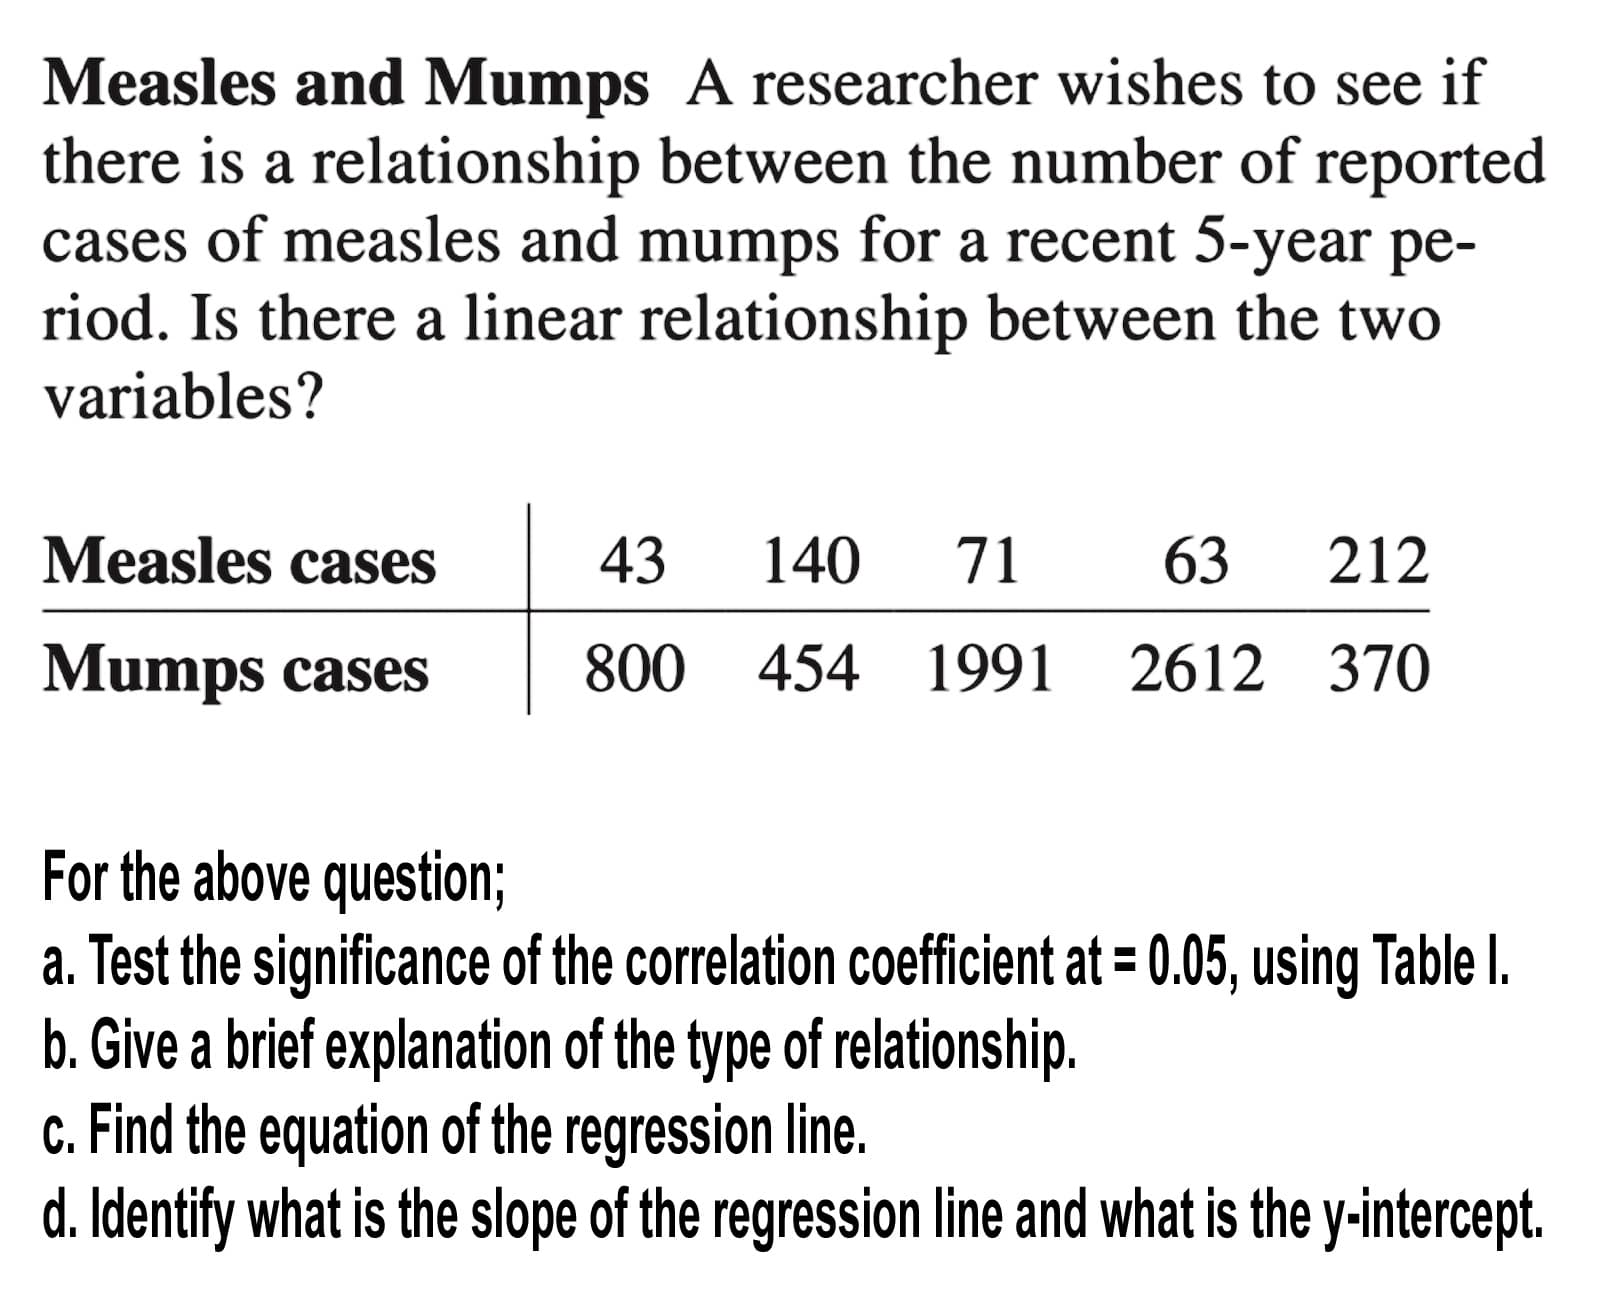 Measles cases
43
140
71
63
212
Mumps cases
800 454 1991 2612 370
For the above question;
a. Test the significance of the correlation coefficient at = 0.05, using Table I.
b. Give a brief explanation of the type of relationship.
c. Find the equation of the regression line.
d. Identify what is the slope of the regression line and what is the y-intercept.
